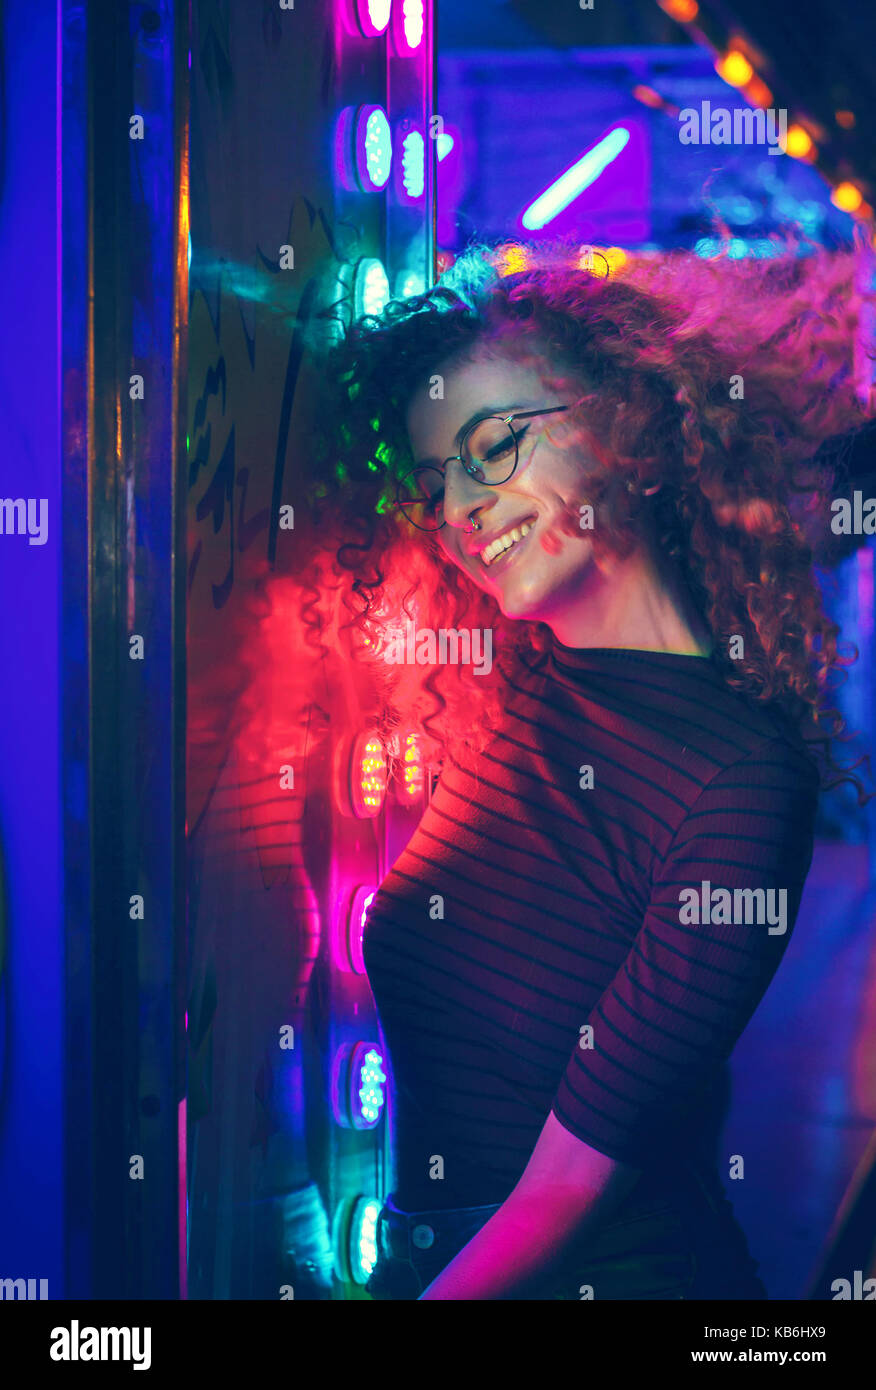 Portrait of a young woman at night illuminated with color lights Stock Photo